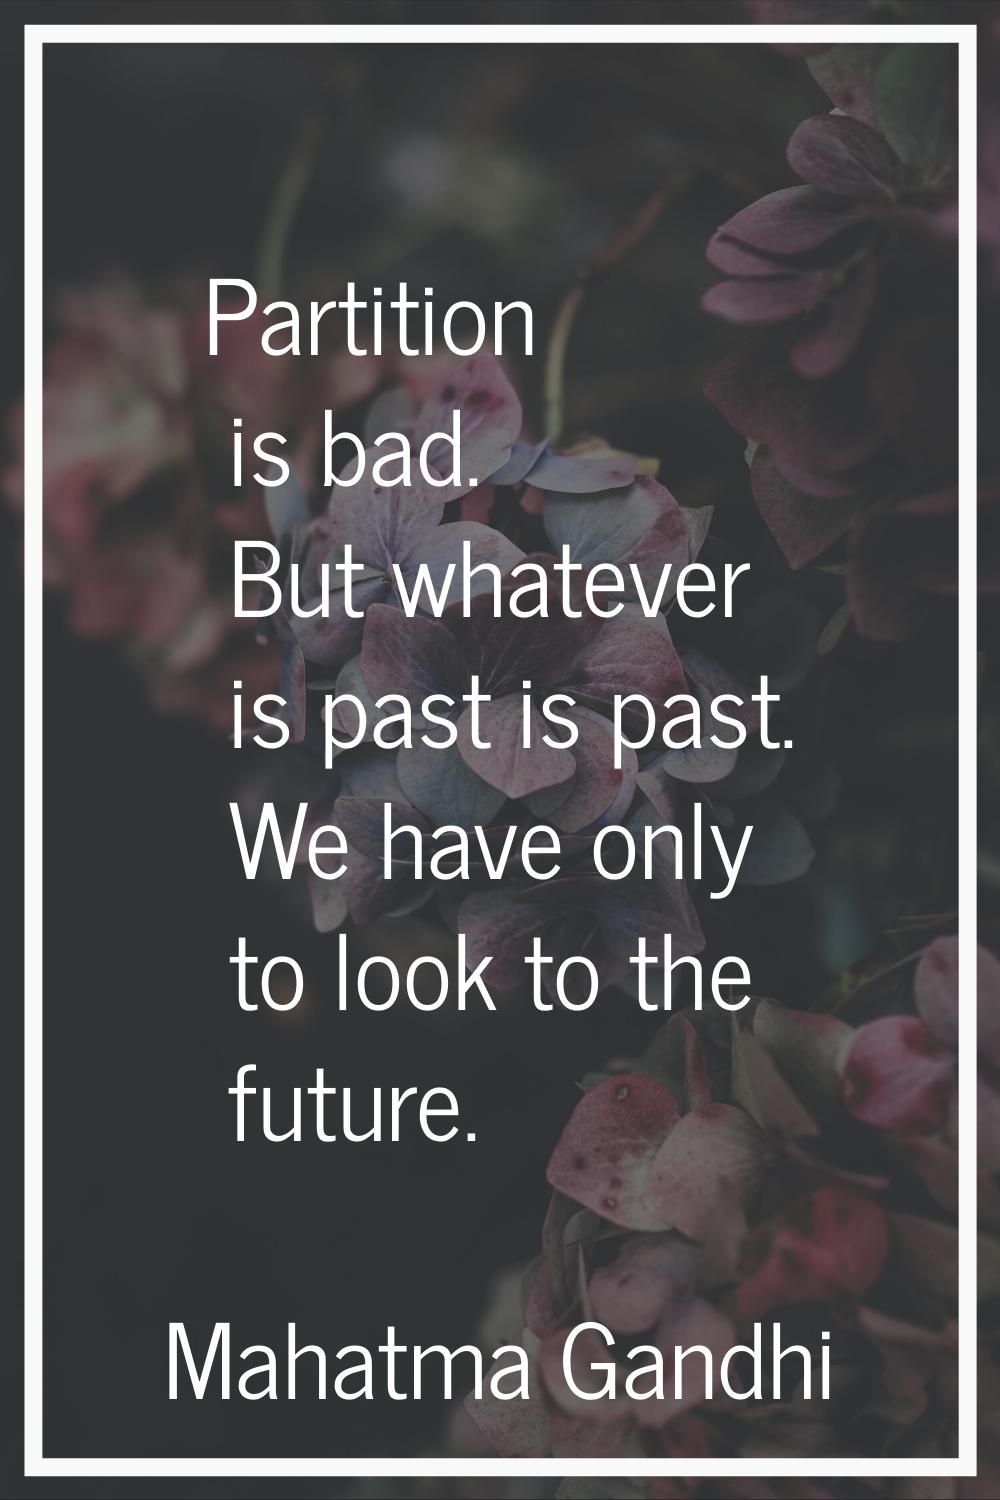 Partition is bad. But whatever is past is past. We have only to look to the future.